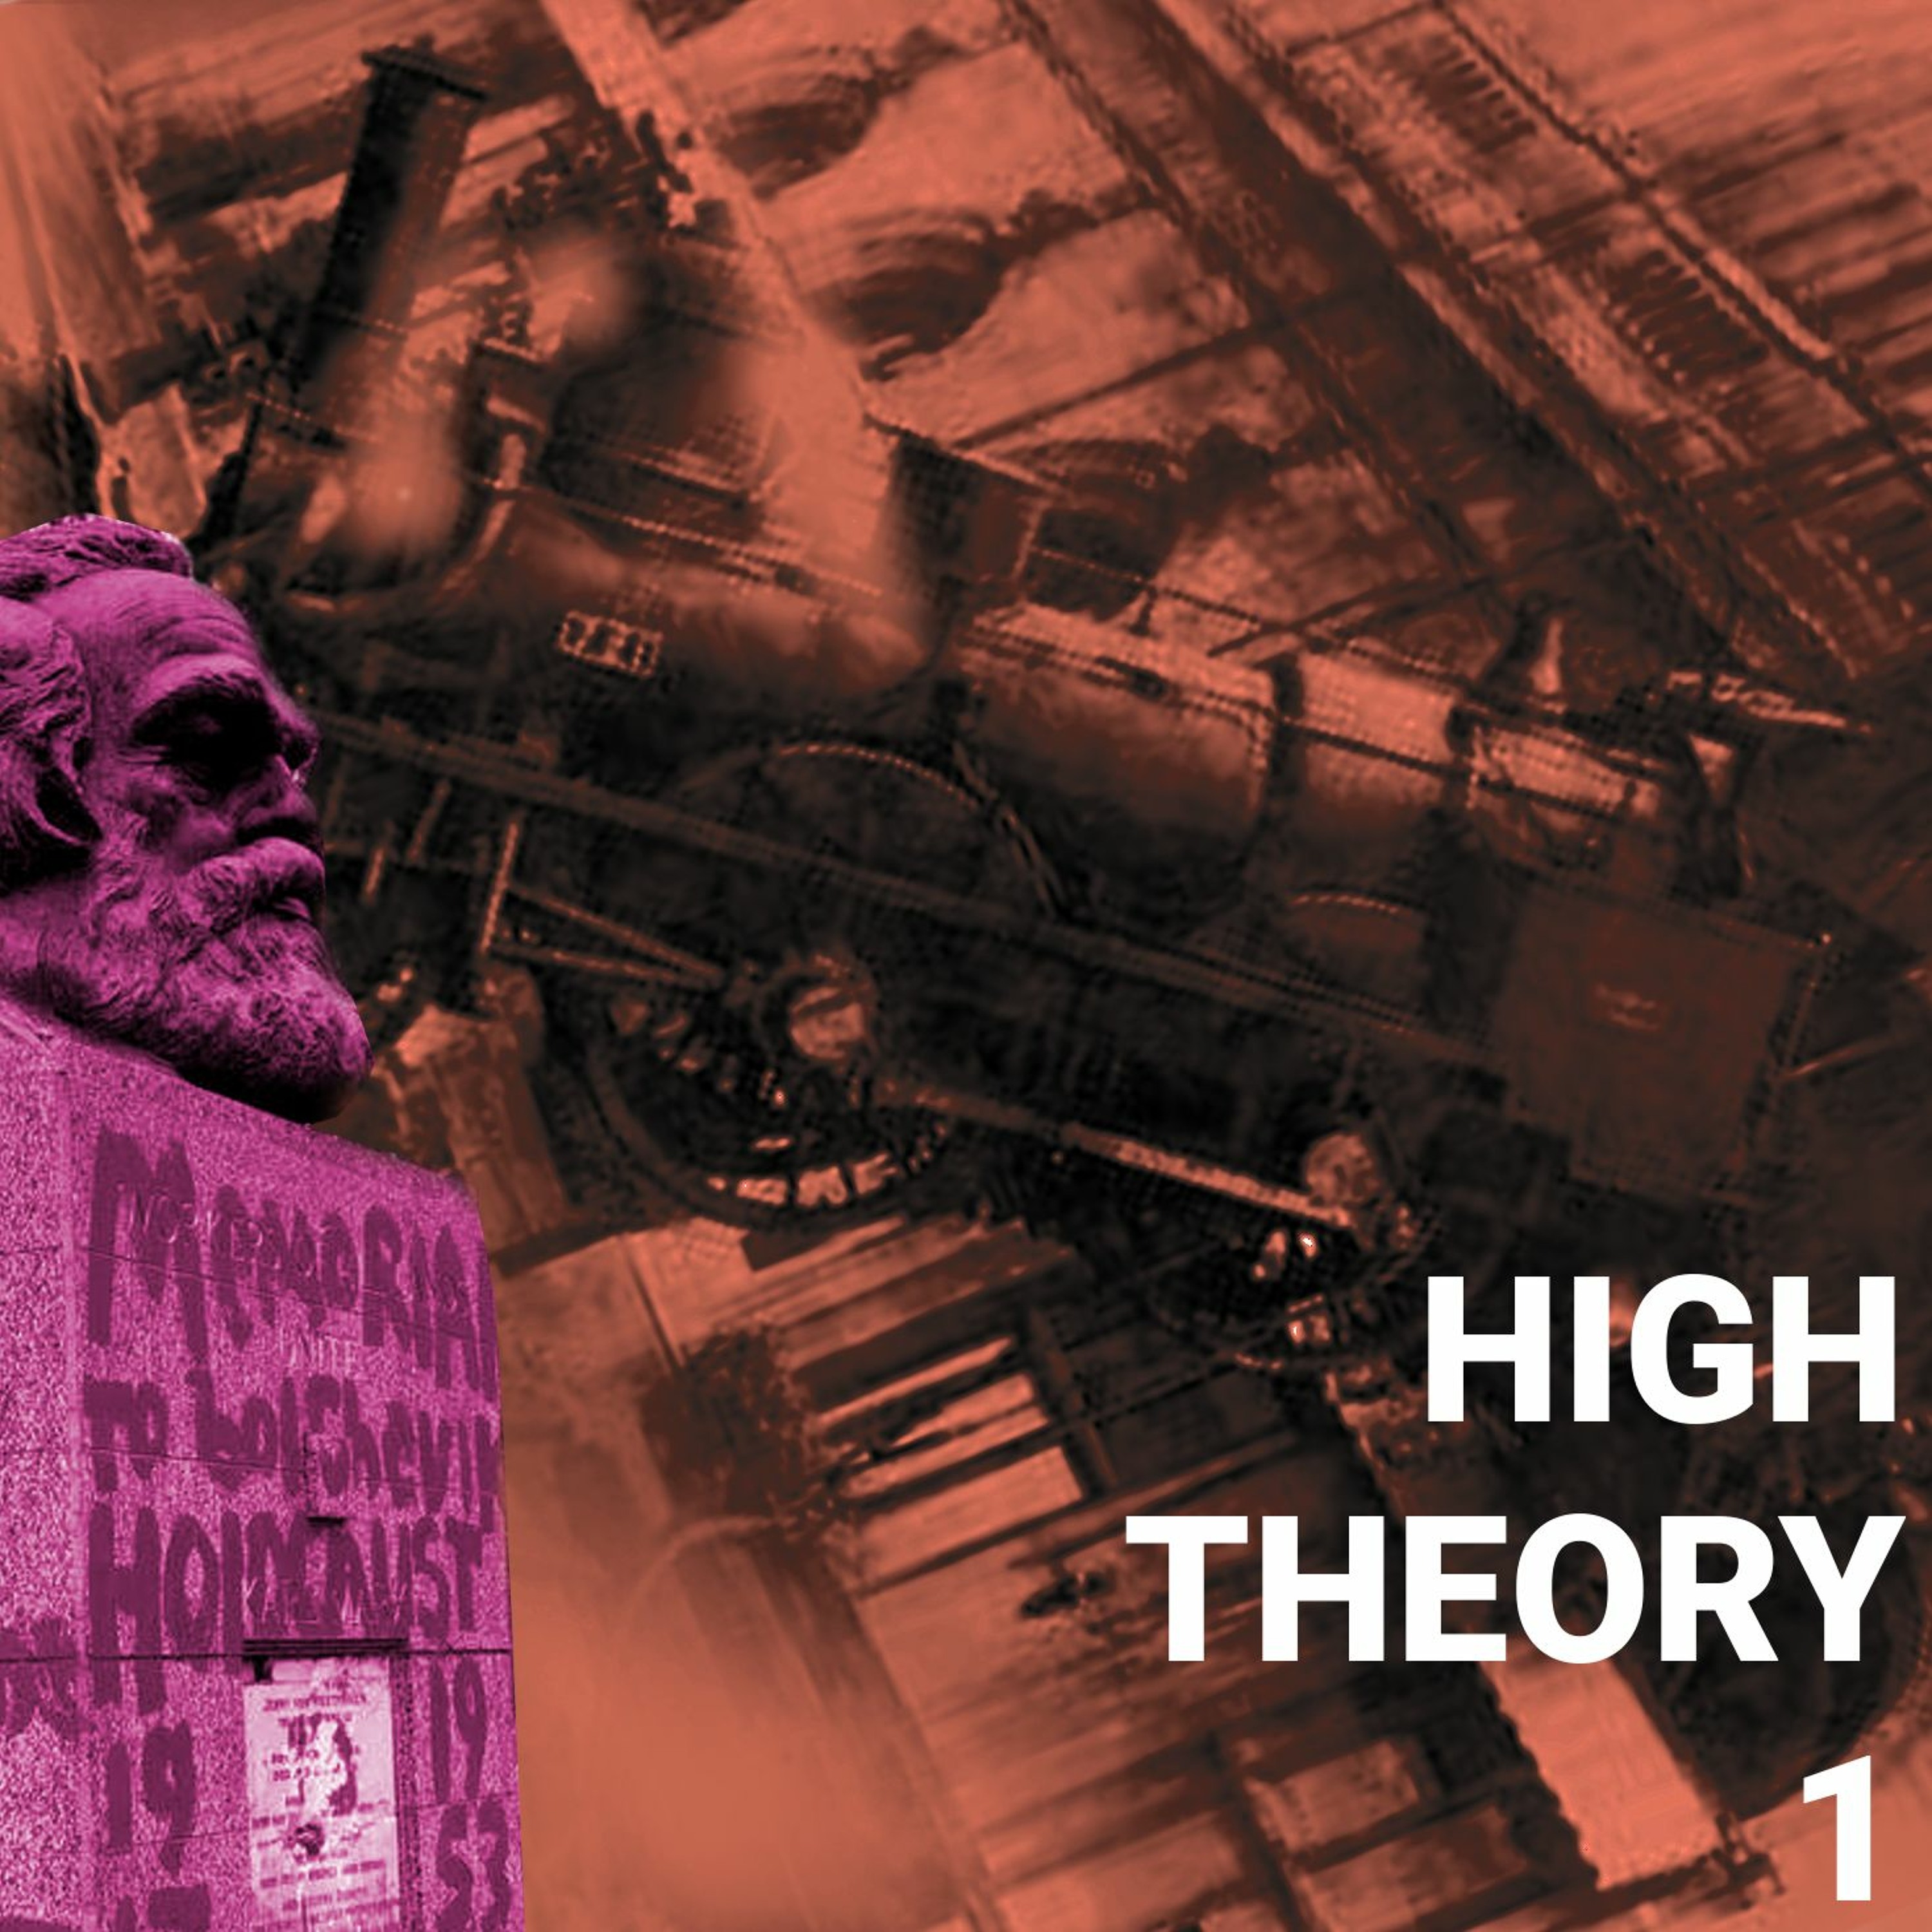 HIGH THEORY 1 - ”Communization and Its Discontents”